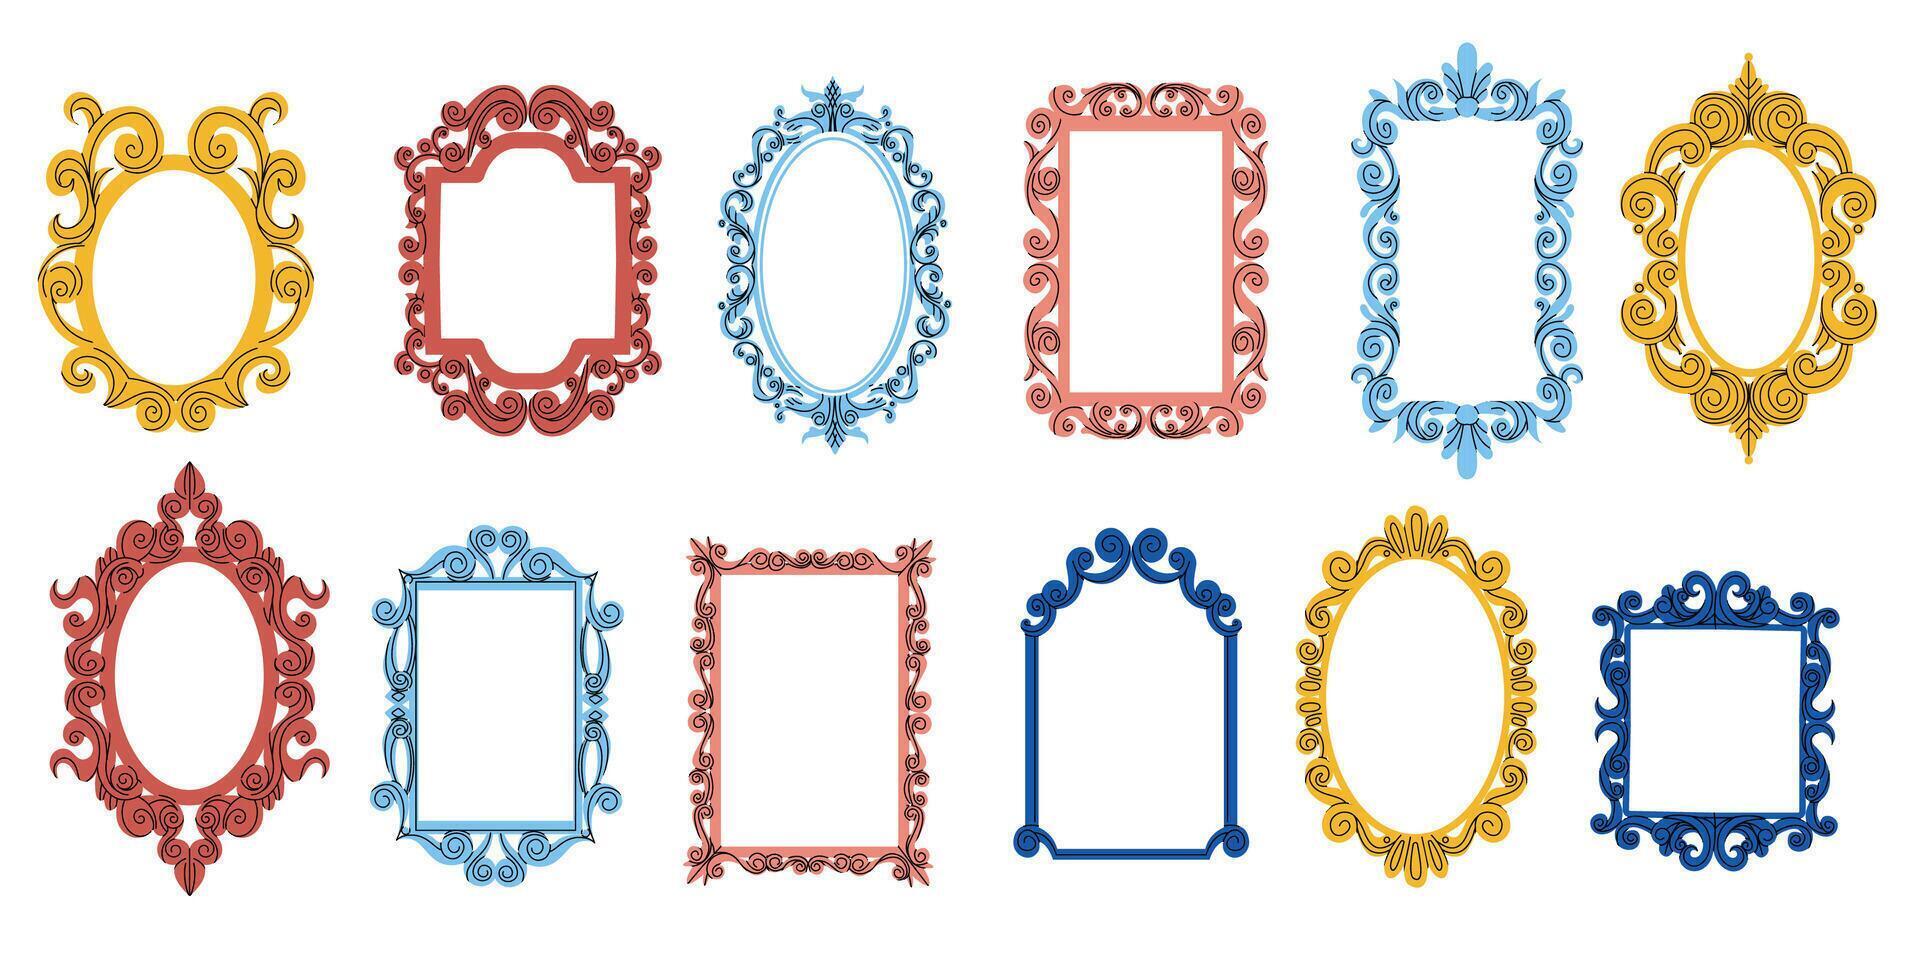 Doodle mirror frames. Antique ornate decorative borders, modern elegant maiden photo frame design cartoon style. Vector isolated collection